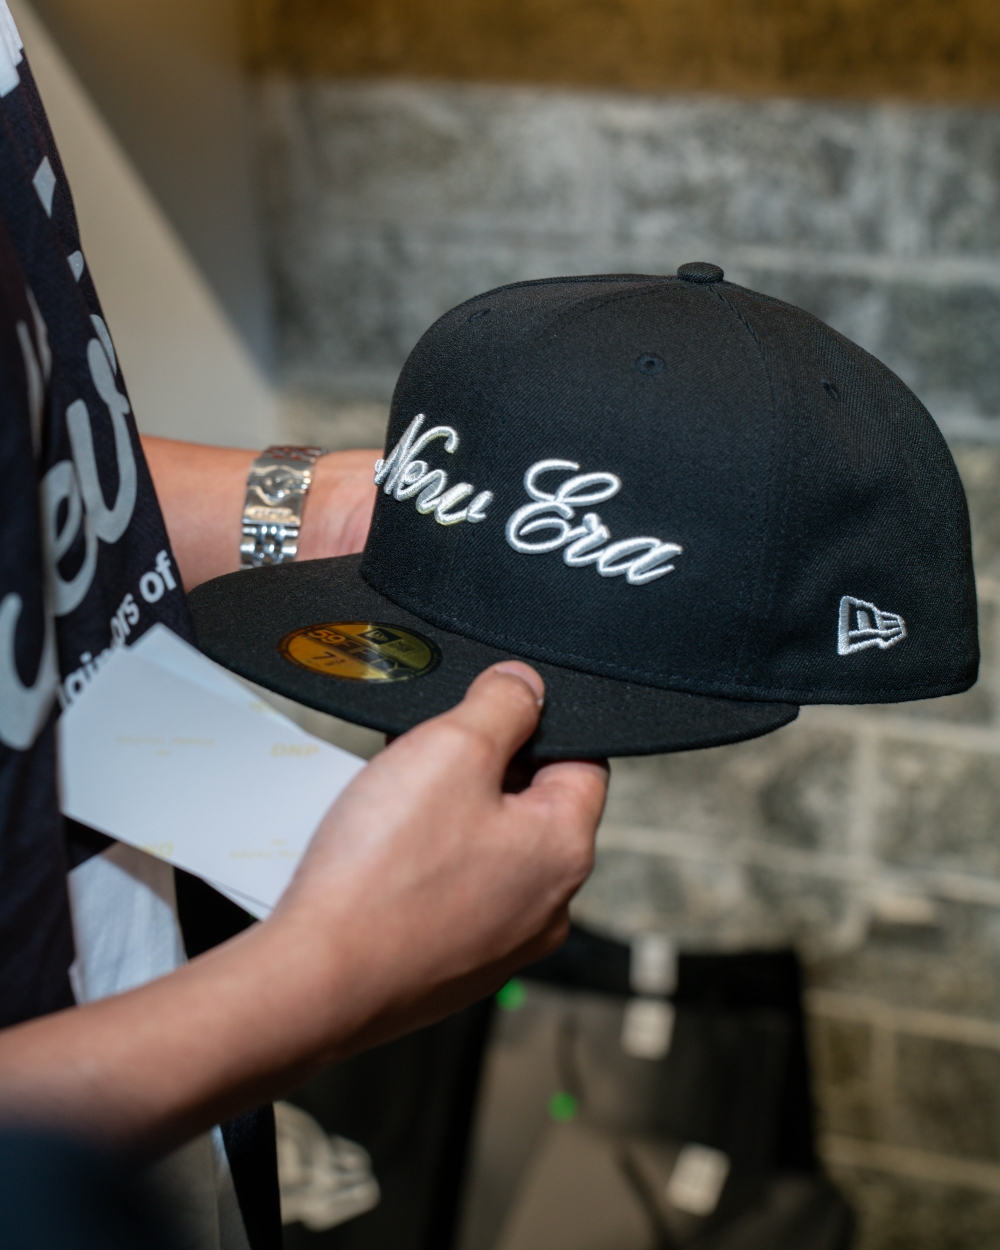 New Era has earned recognition among professional baseball players in the United States. — Picture courtesy of New Era